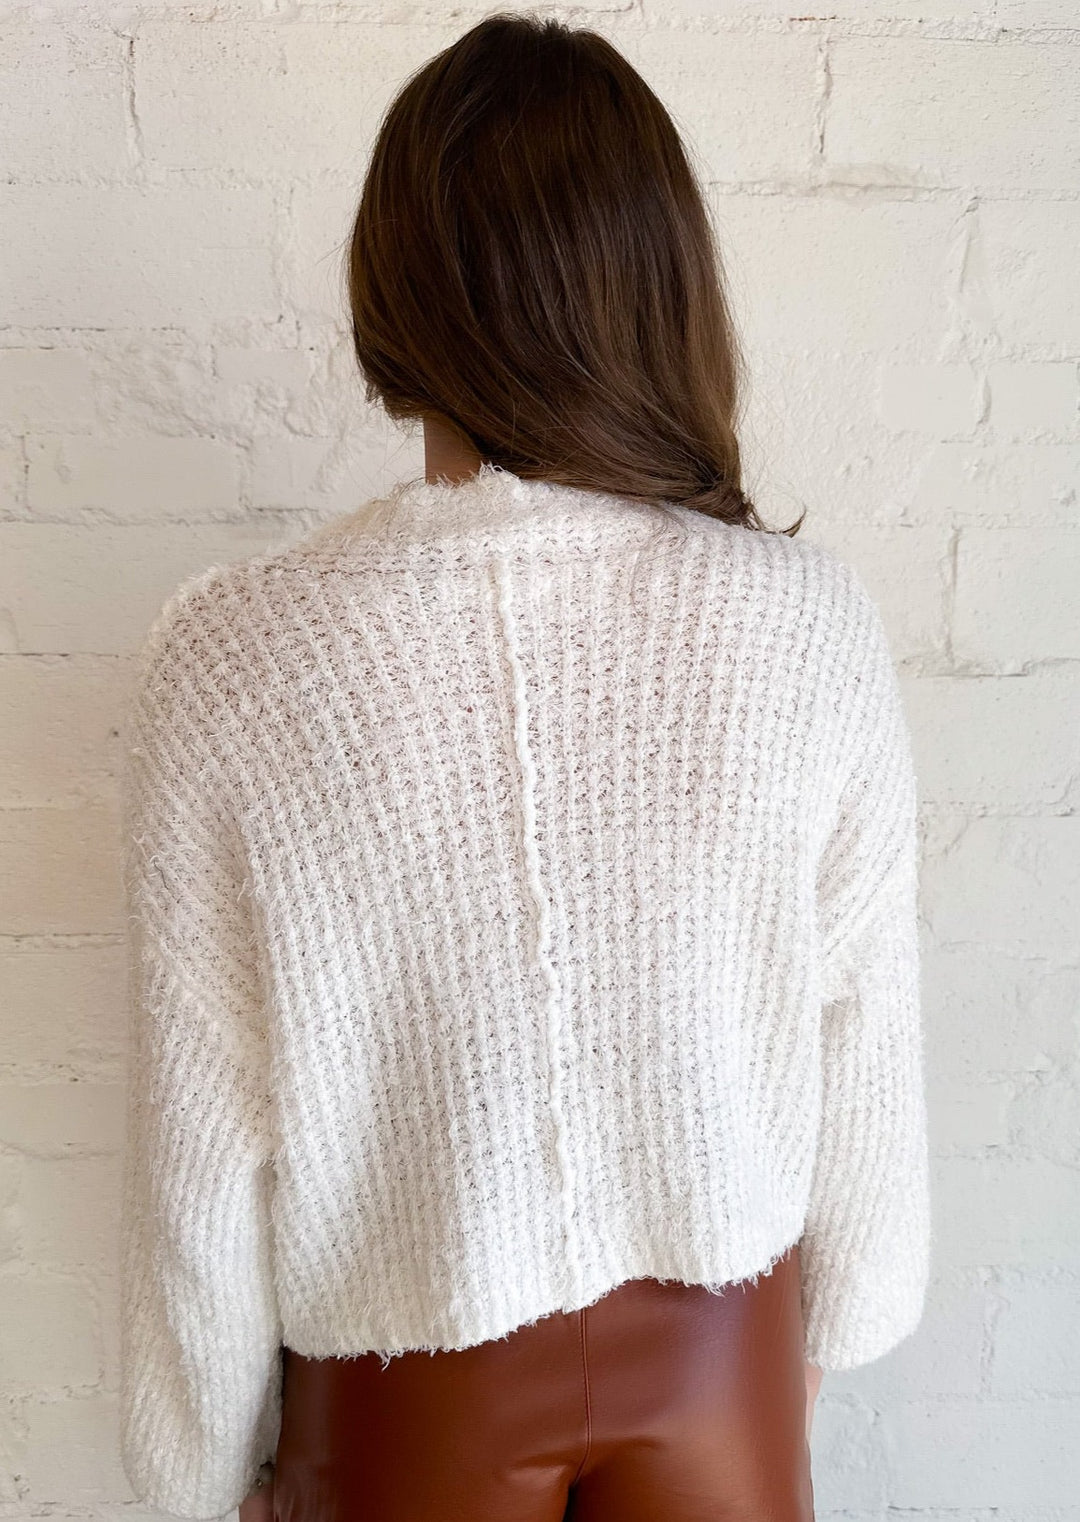 Cold Days Knit Top, Tops, Adeline, Adeline, dallas boutique, dallas texas, texas boutique, women's boutique dallas, adeline boutique, dallas boutique, trendy boutique, affordable boutique